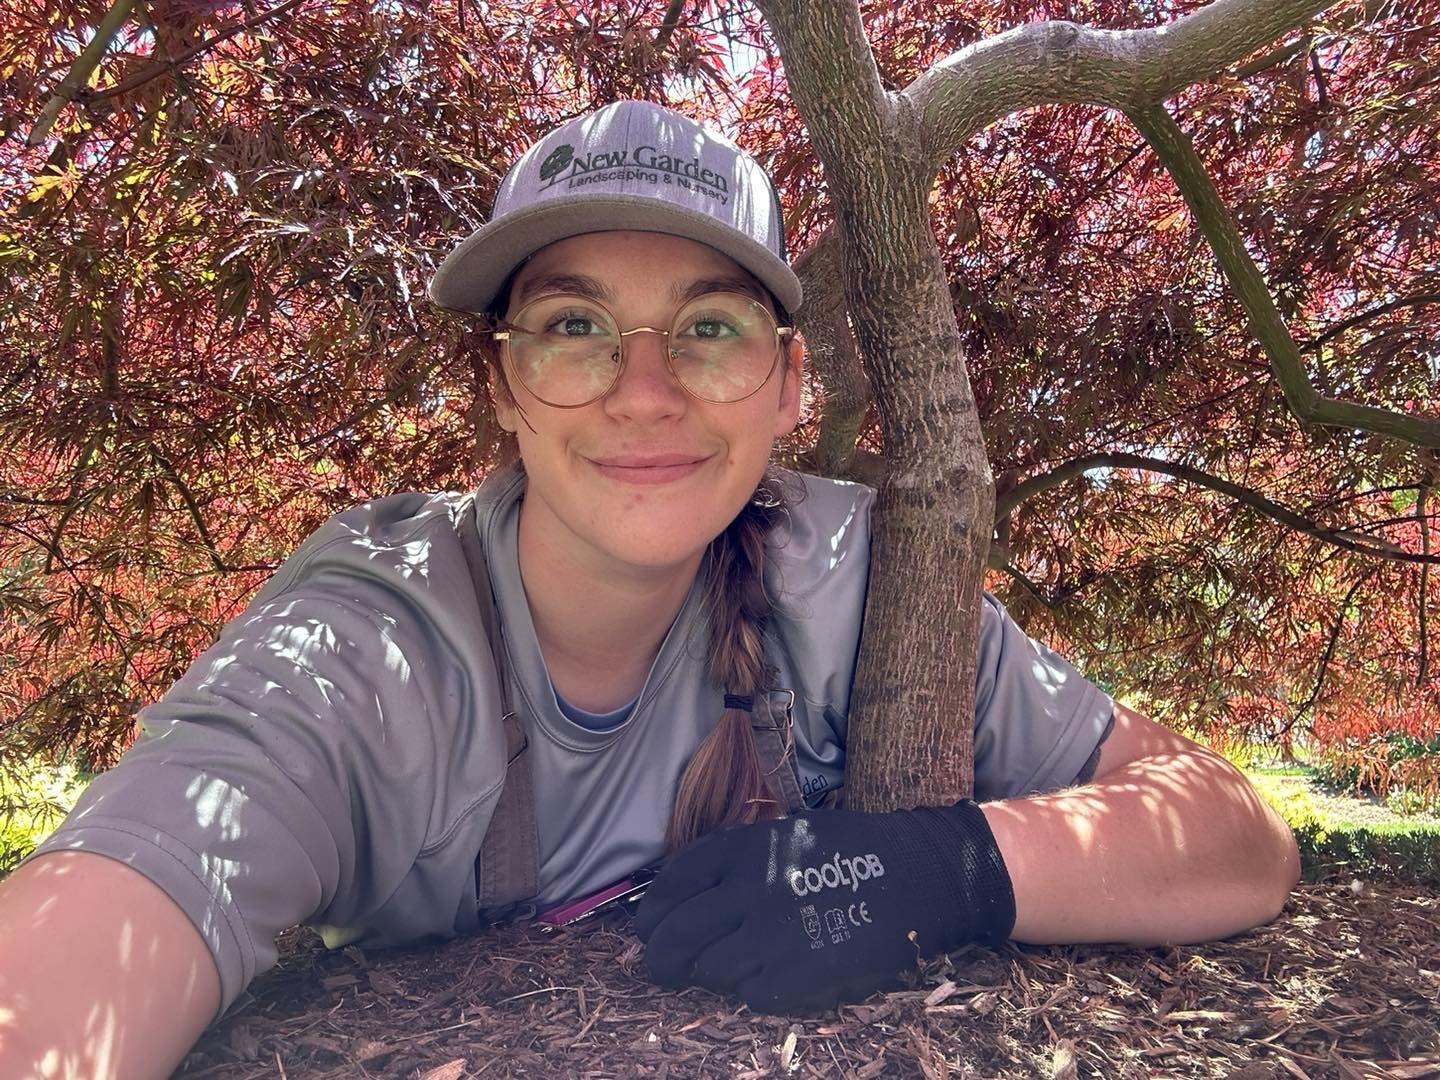 Celebrating Women in Horticulture week (5/27-6/3)  by shedding a light on some of the amazing women we have working at New Garden! Today's spotlight is Hazel Bost. 

Hazel worked a lot of short-term outdoors jobs, mostly with horses. She got to see a